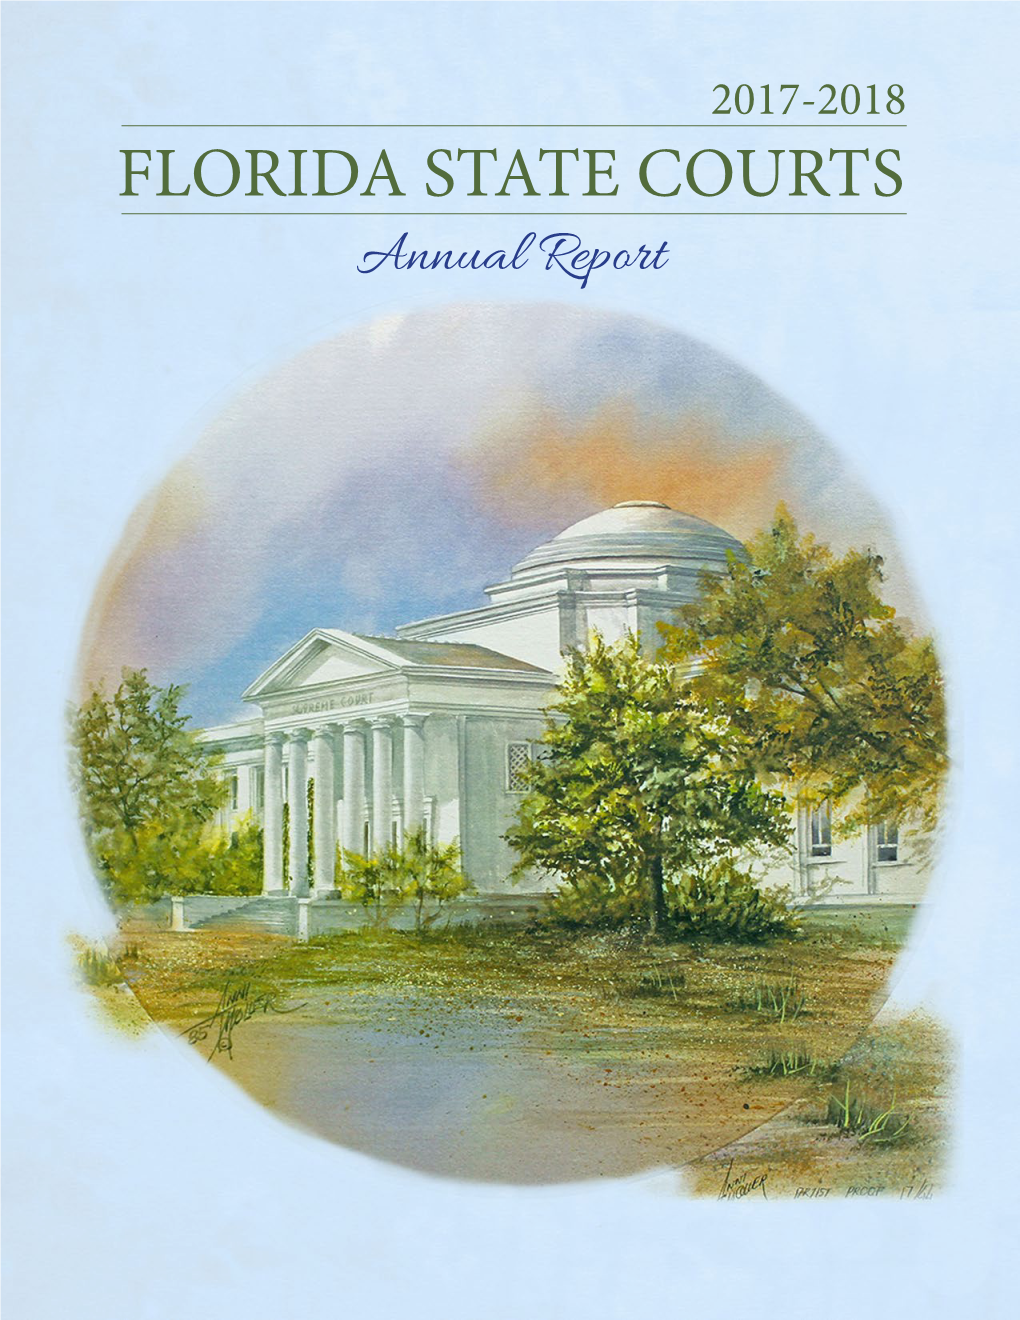 Florida State Courts 2017